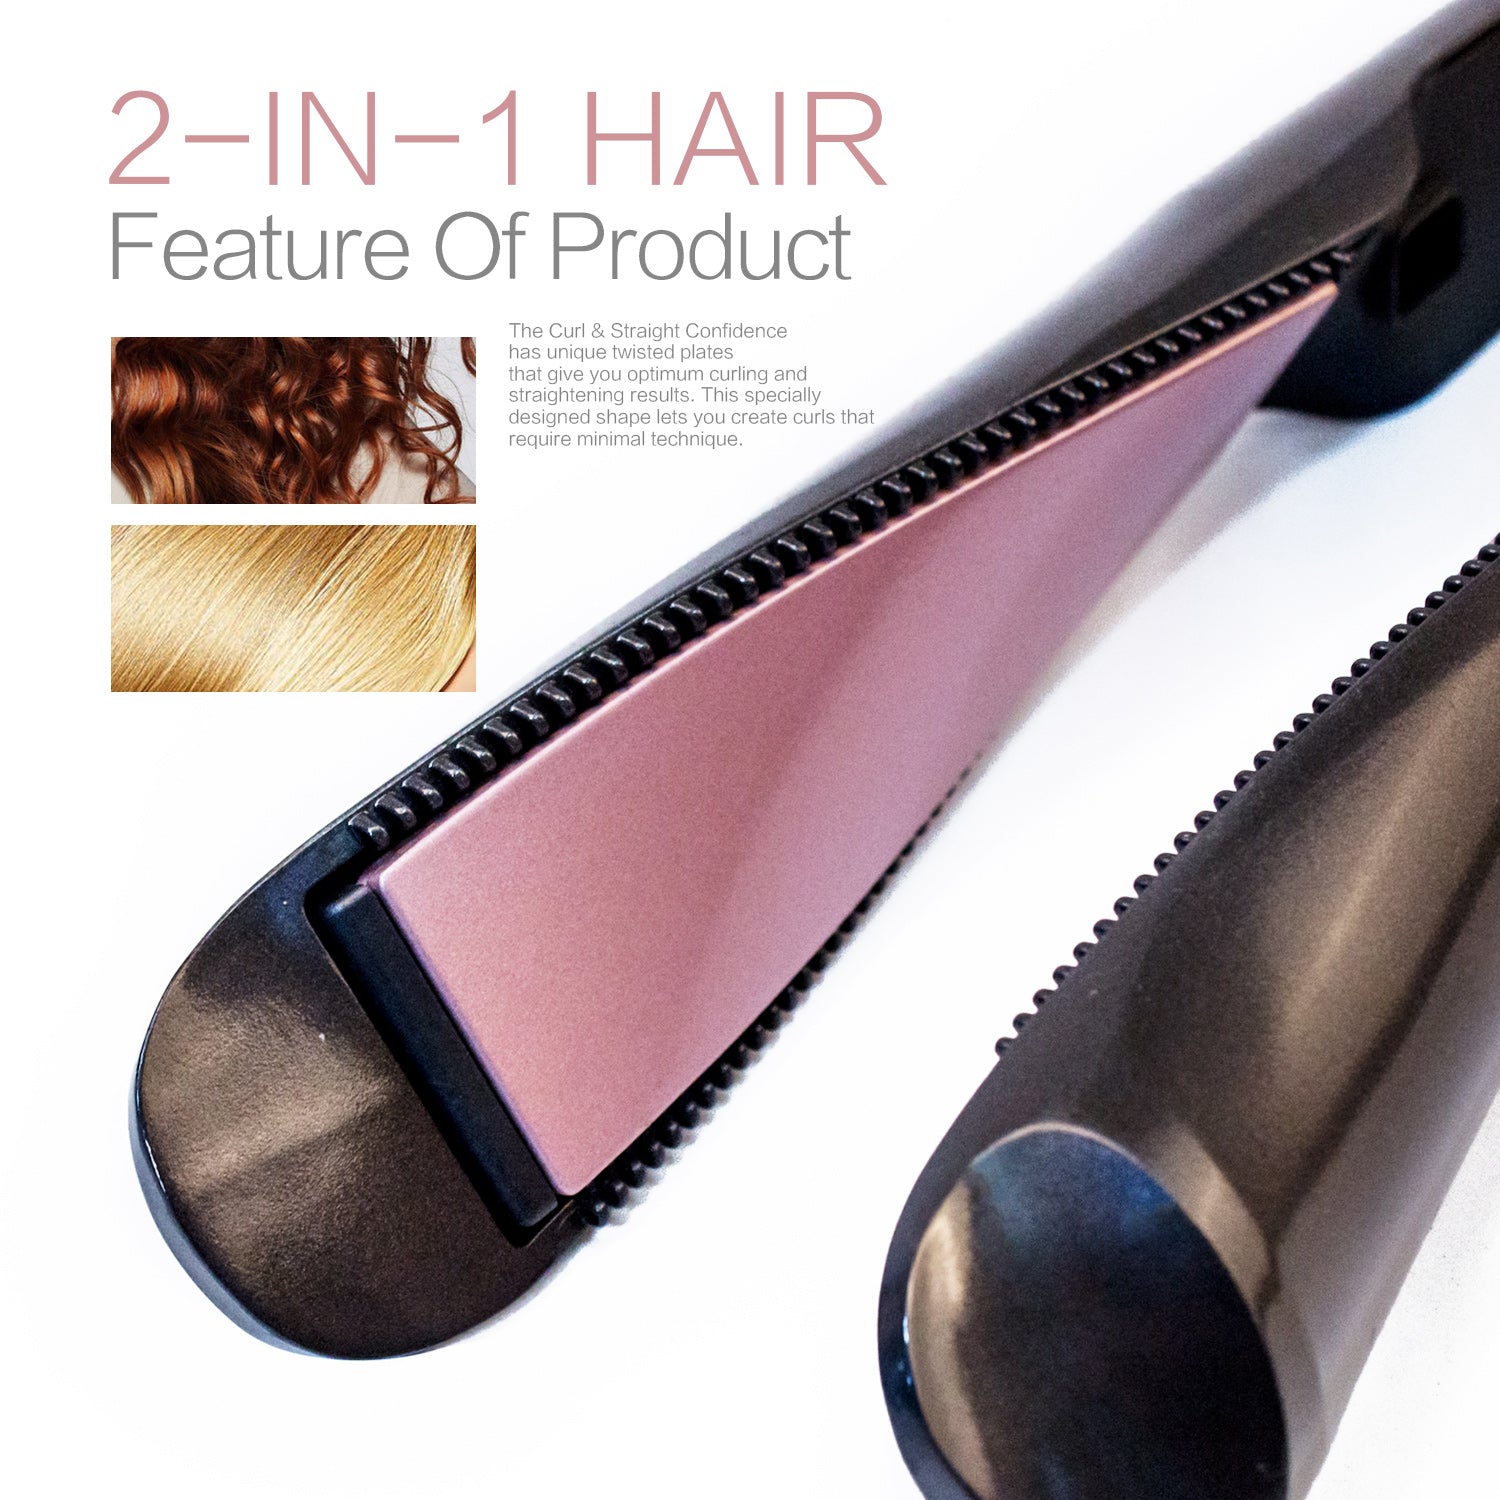 2 in 1 Electric Hair Straightener Ceramic Curling Wand Iron Curler